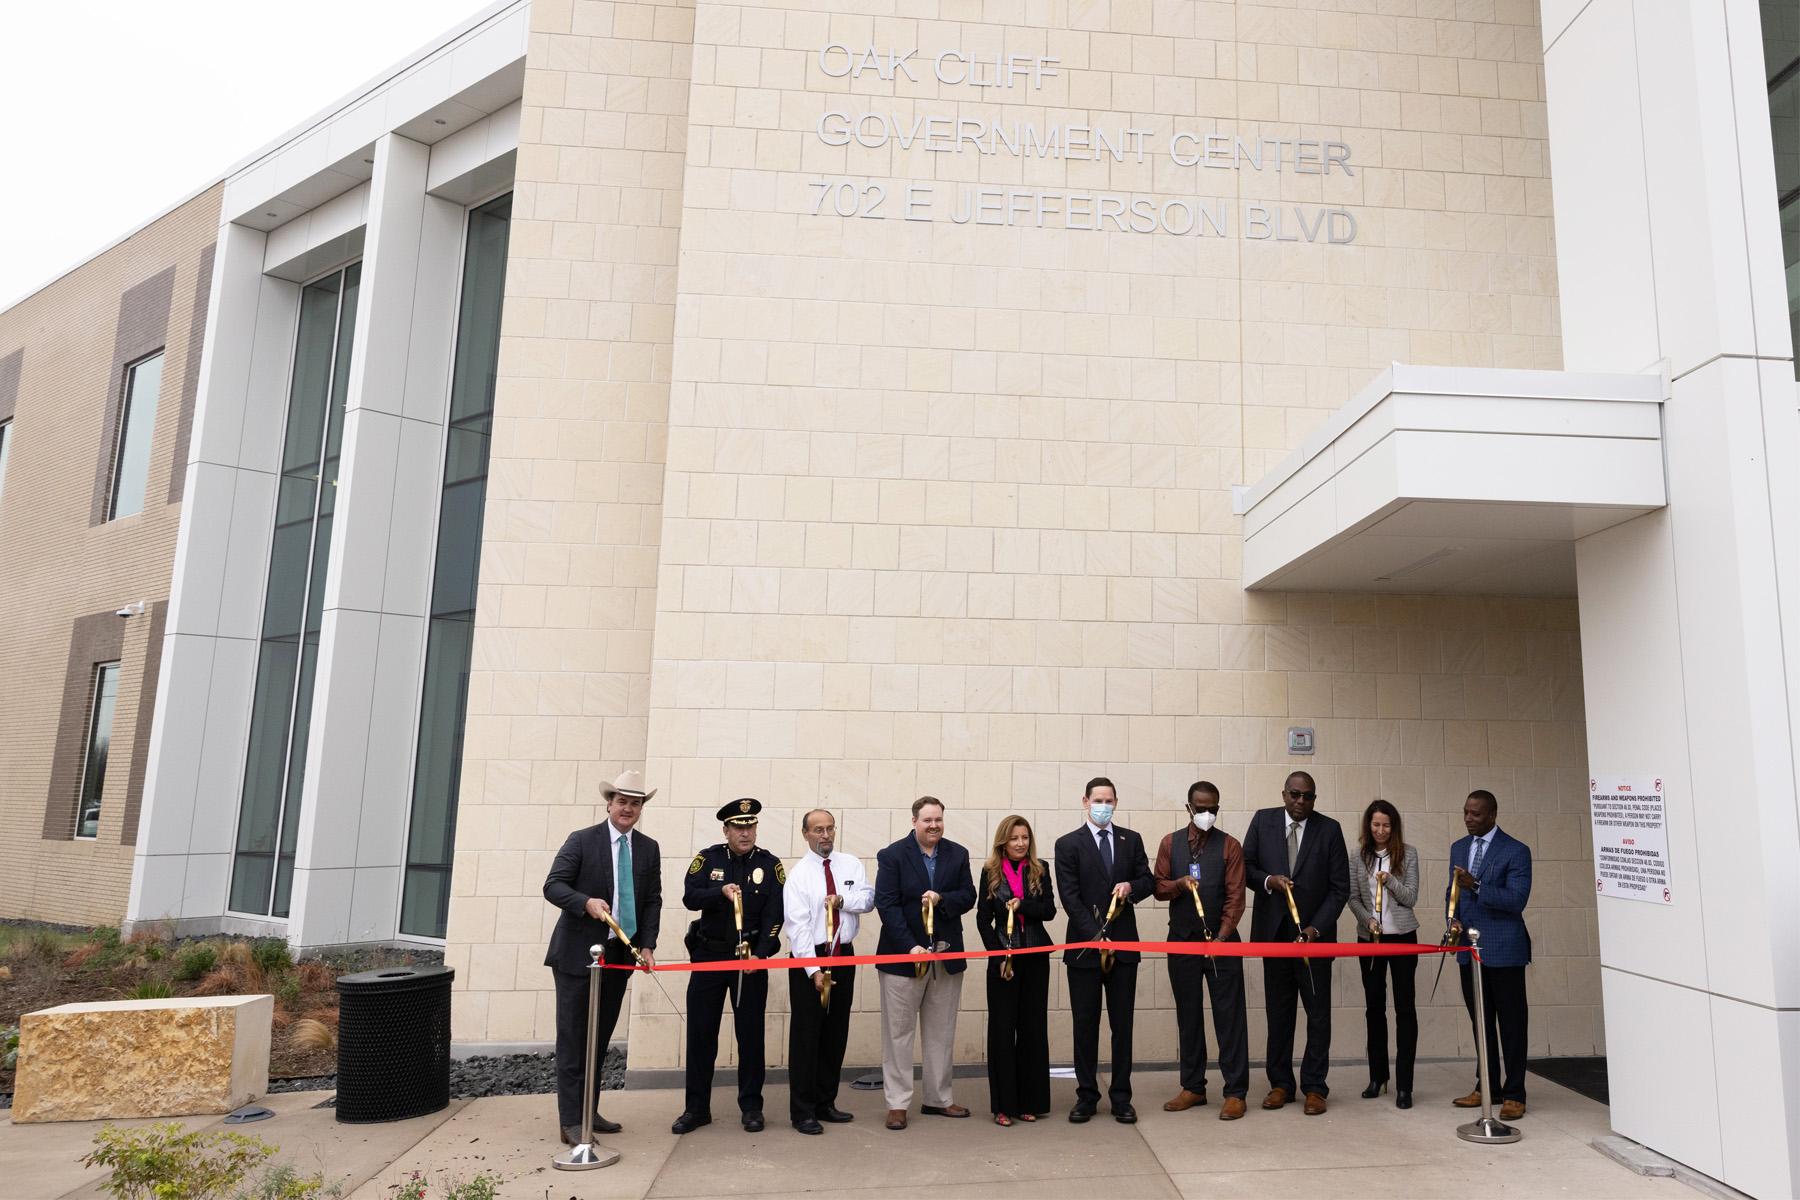 A ribbon-cutting ceremony took place to celebrate the opening of the new Dallas County Oak Cliff Government Center in Dallas, Texas. 